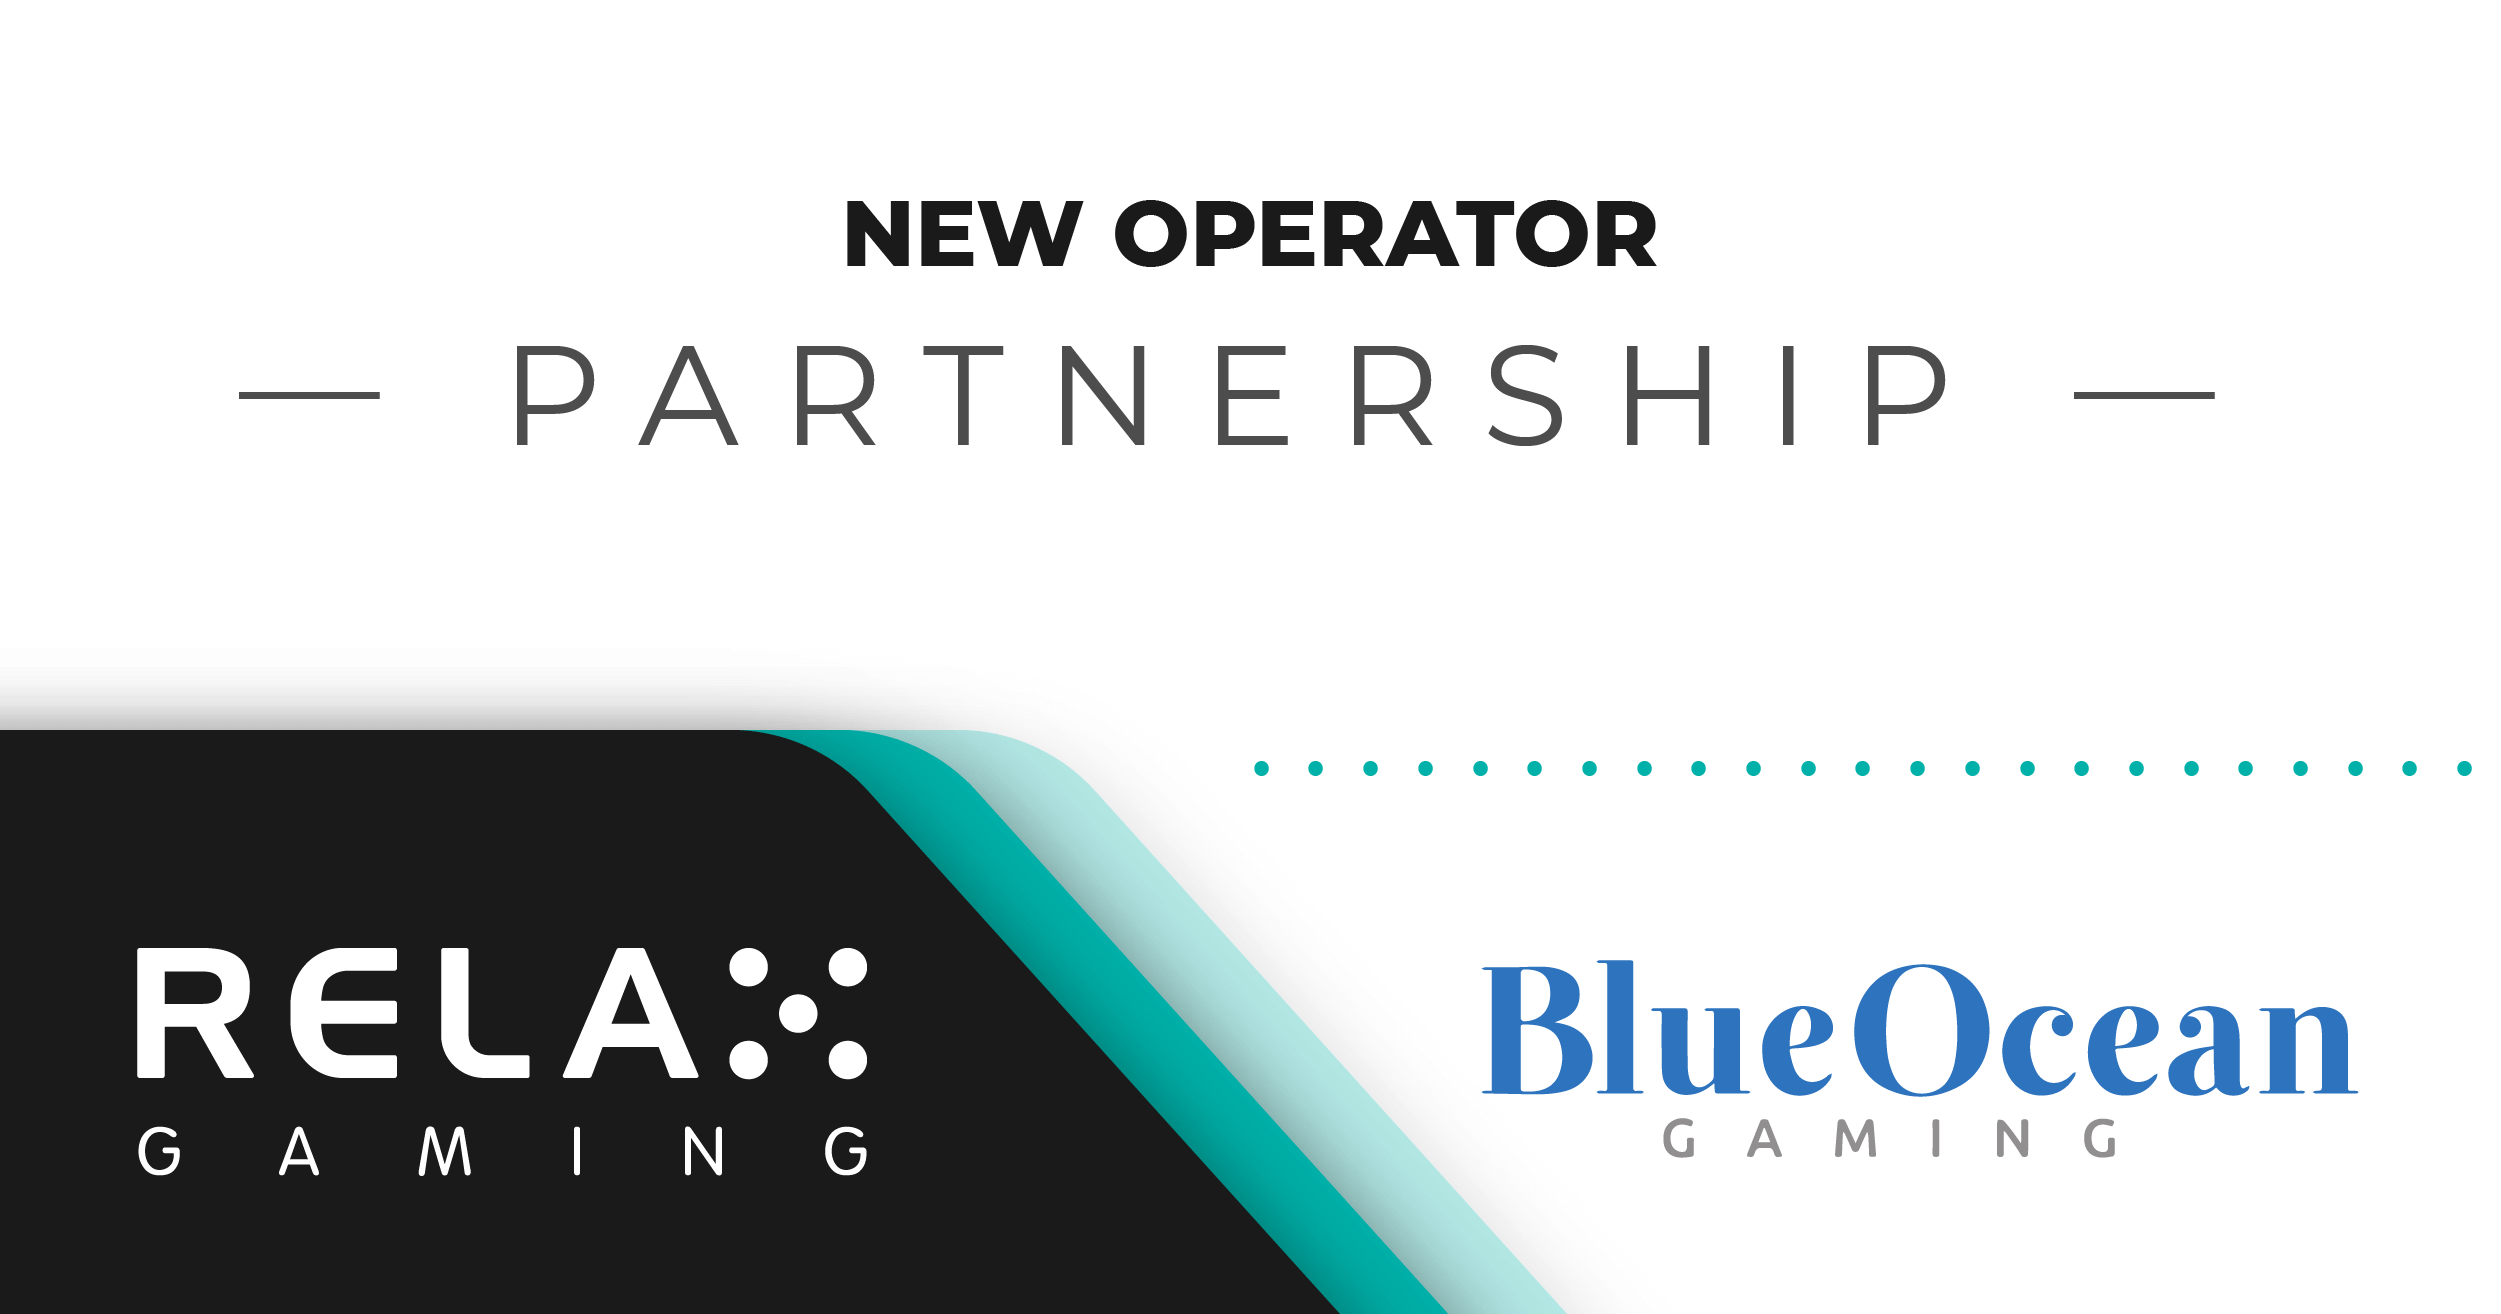 Relax Gaming expands reach with Blue Ocean Gaming agreement